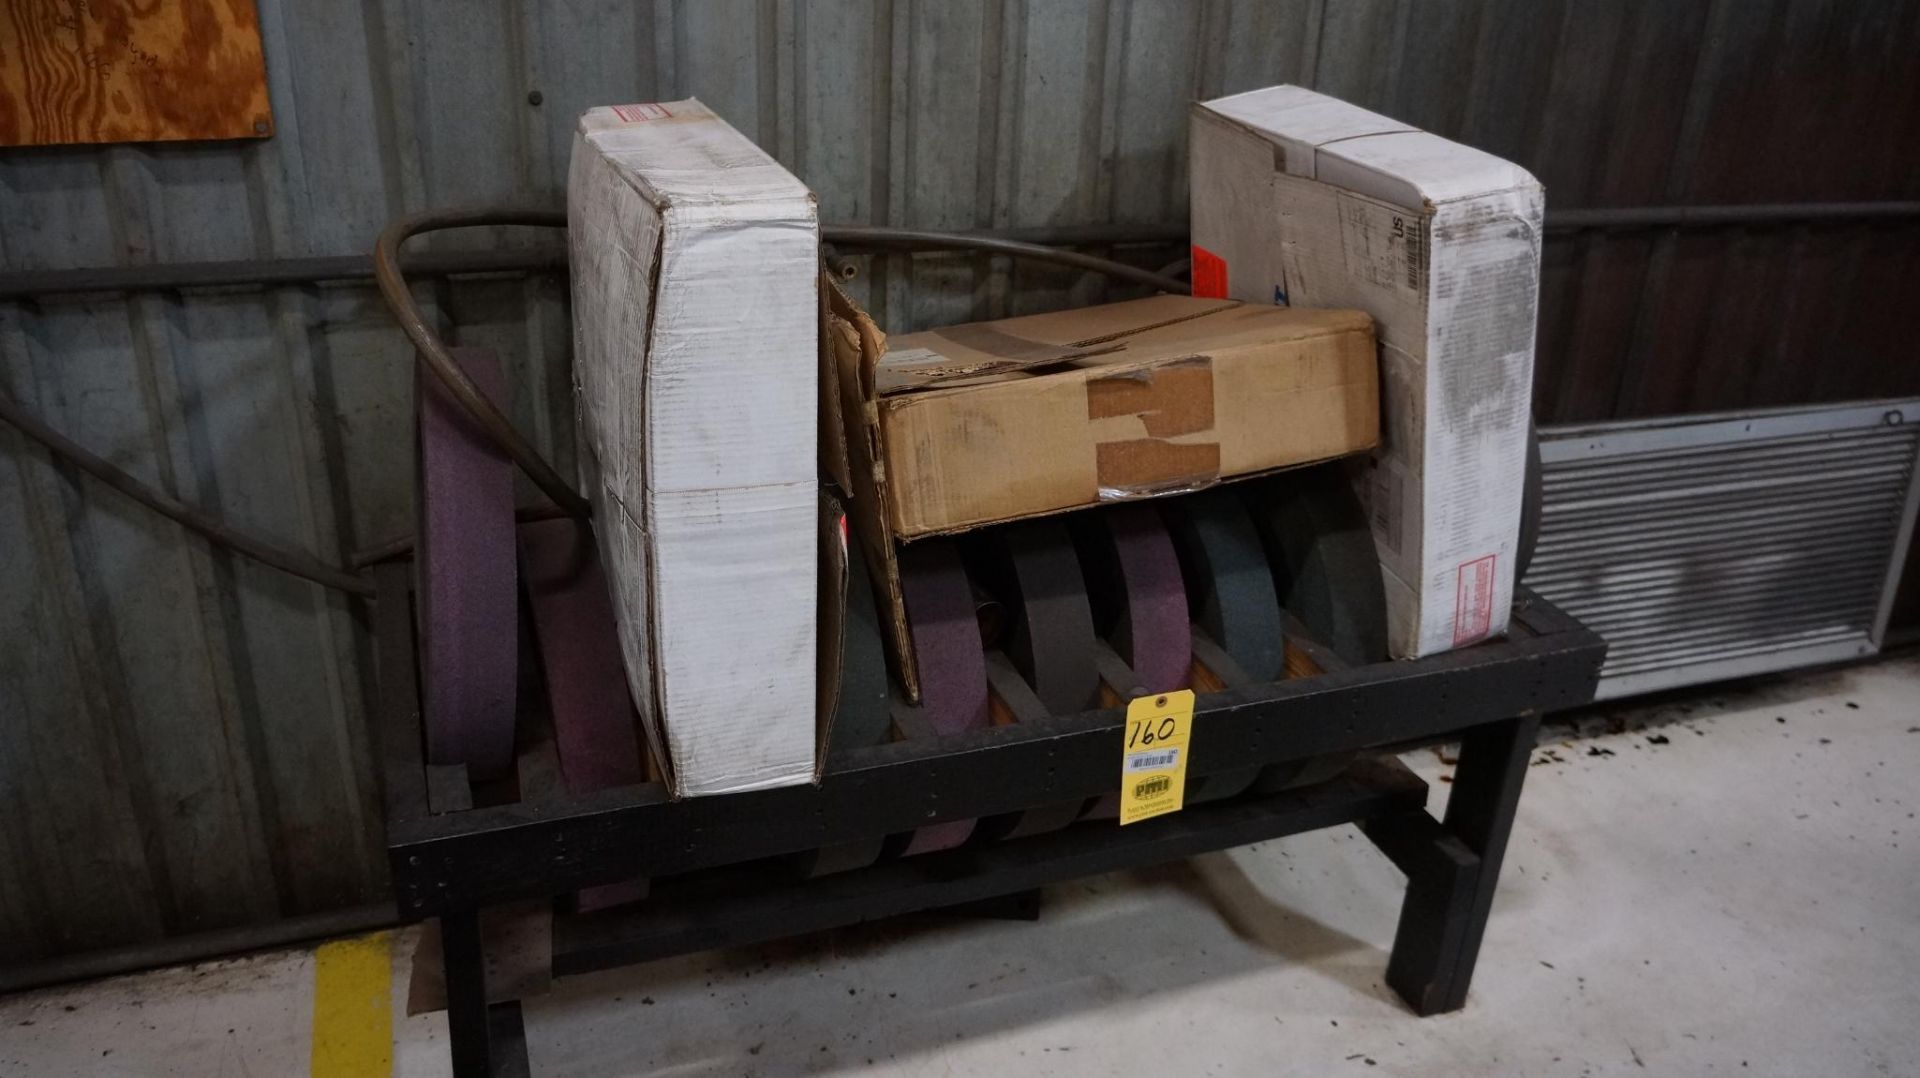 LOT CONSISTING OF: (1) pallet of grinding wheels, (1) stand, approx. 13", (stand included)